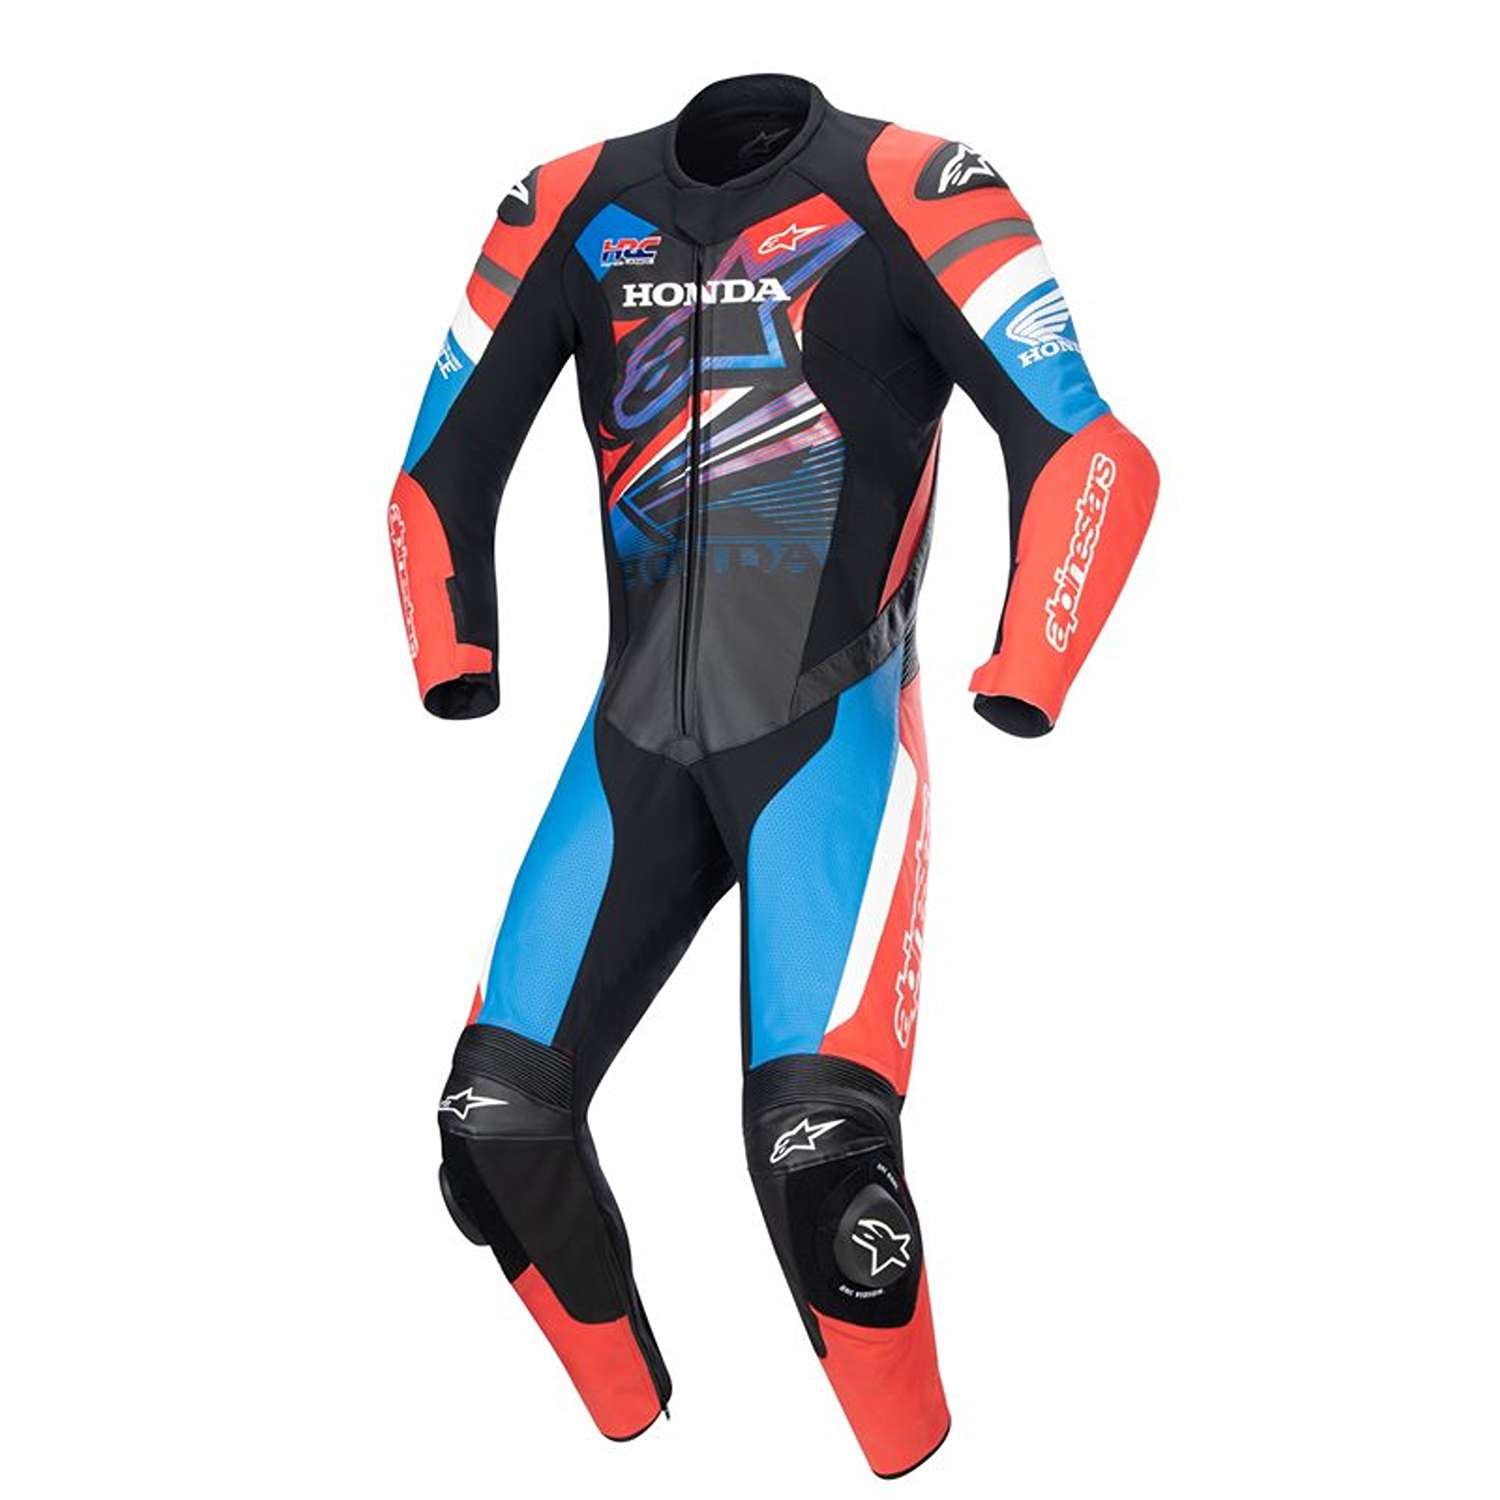 Image of Alpinestars Honda Gp Force Leather Suit Black Bright Red Blue Size 58 ID 8059347160337